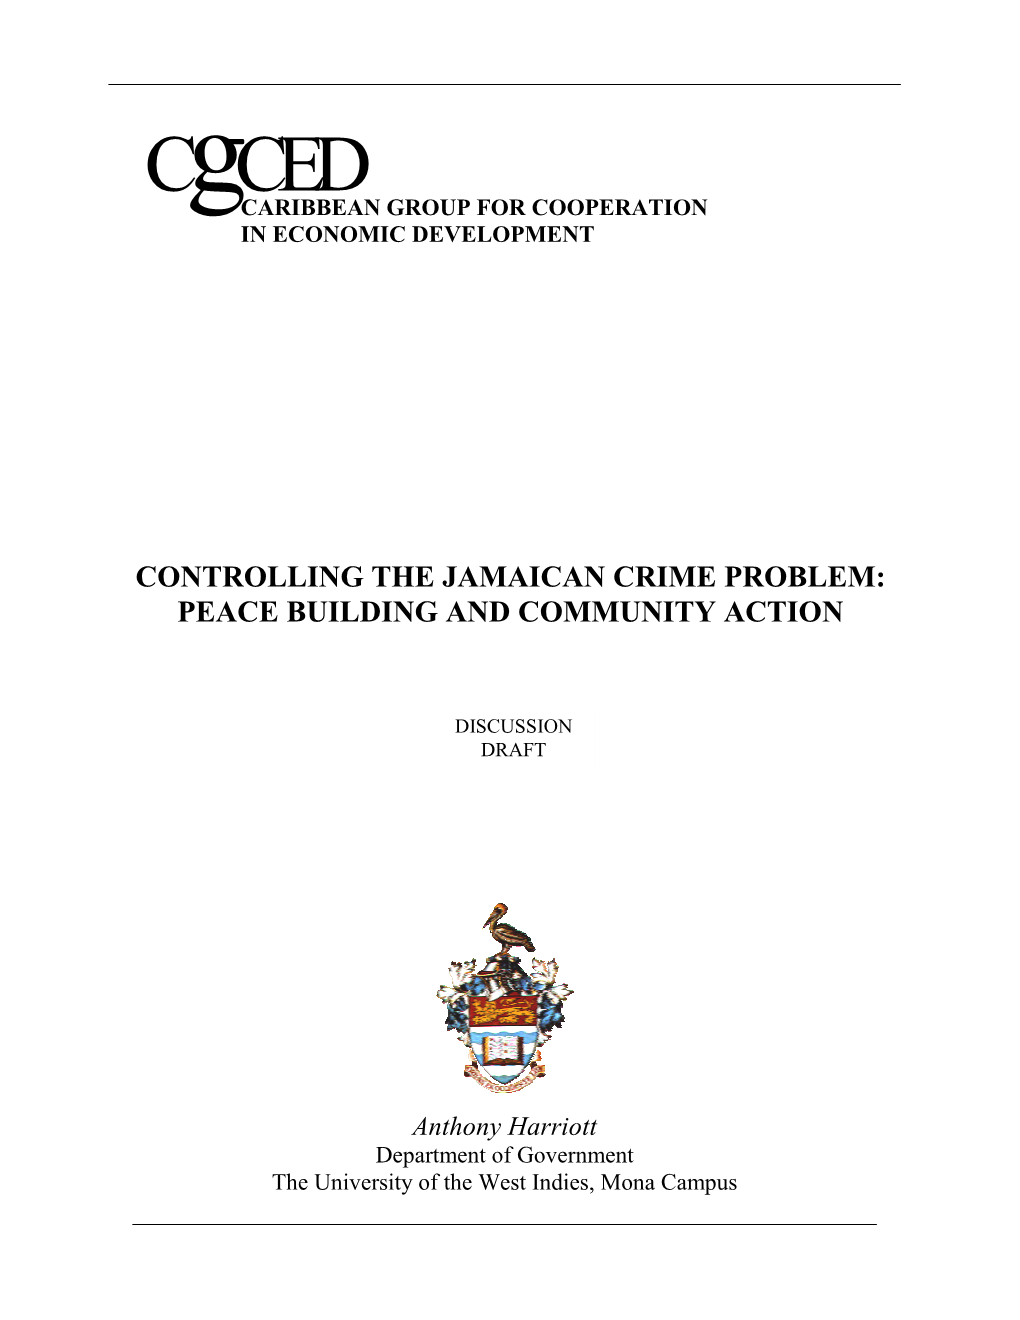 The Jamaican Crime Problem: Peace Building and Community Action